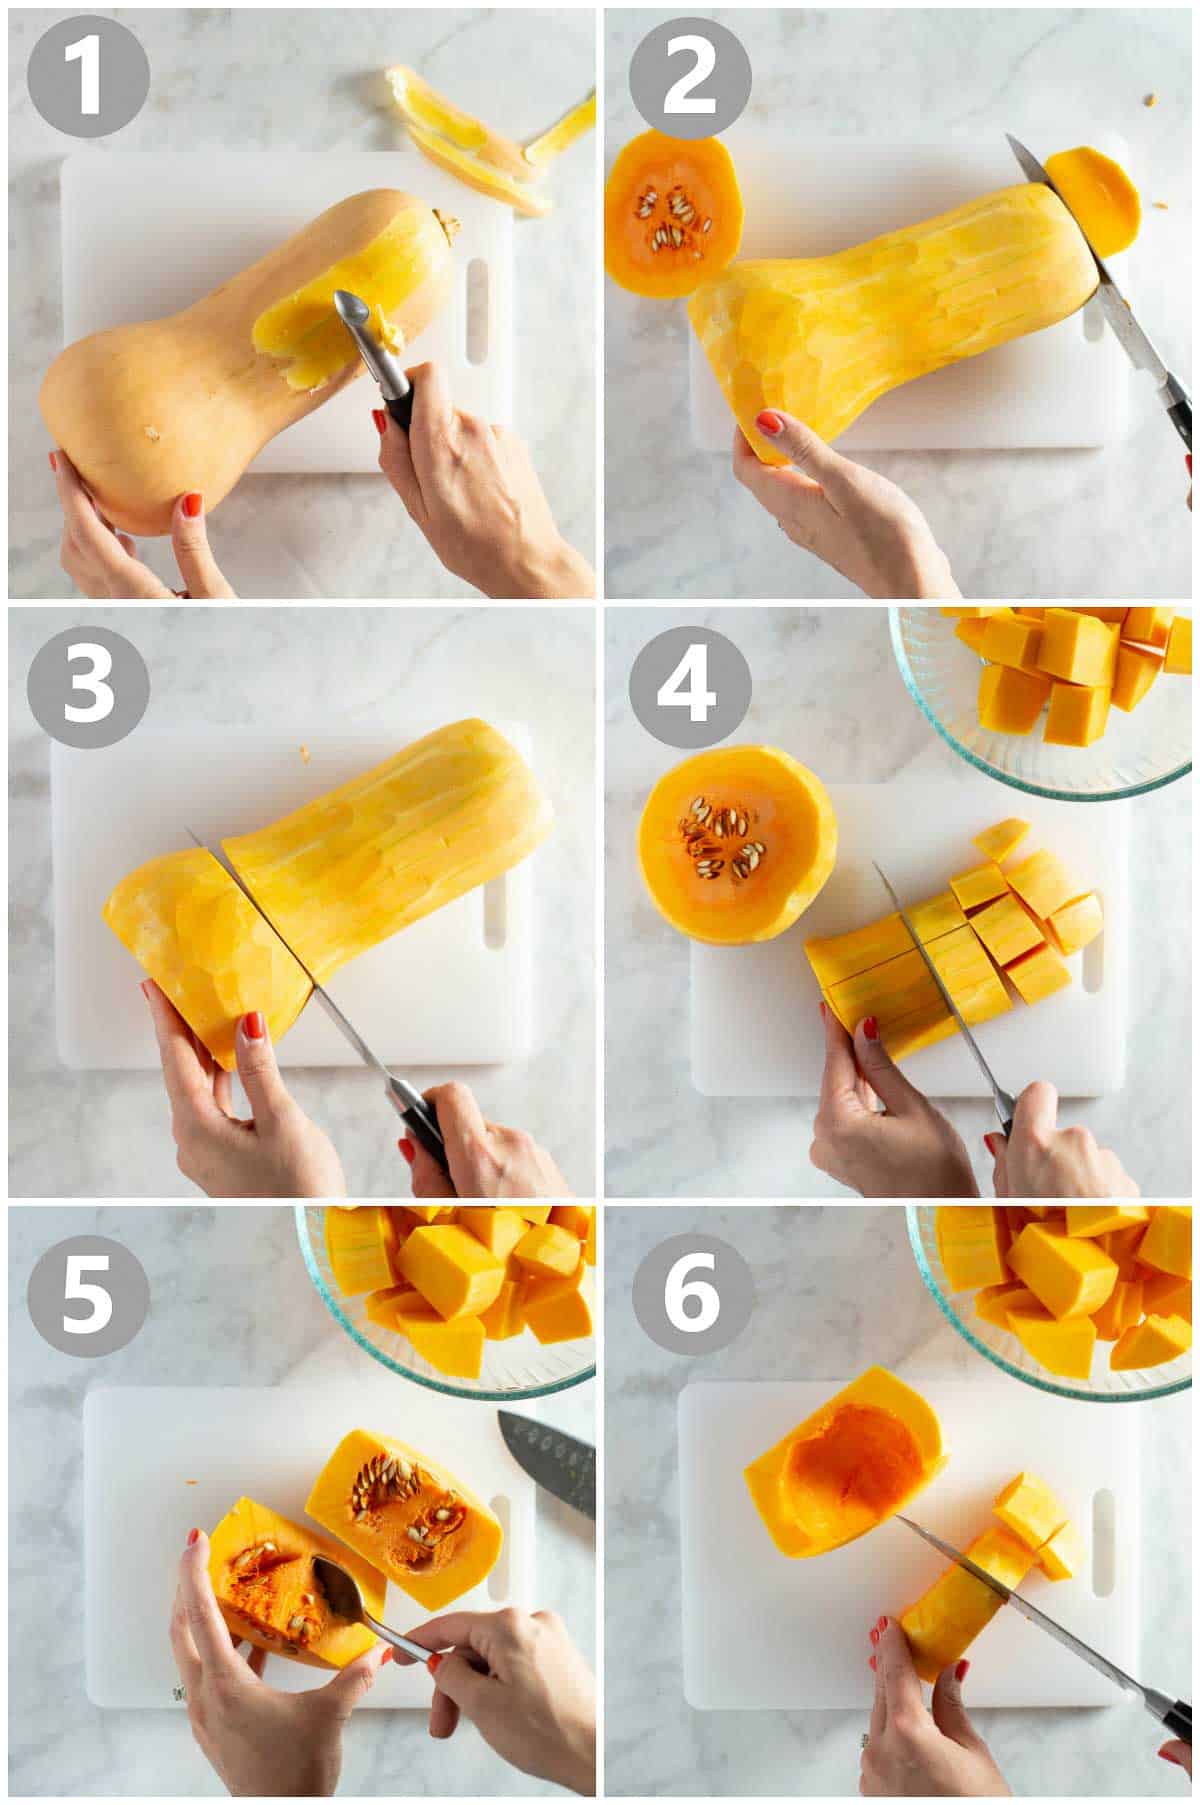 step-by-step instructions of how to peel and cut up butternut squash